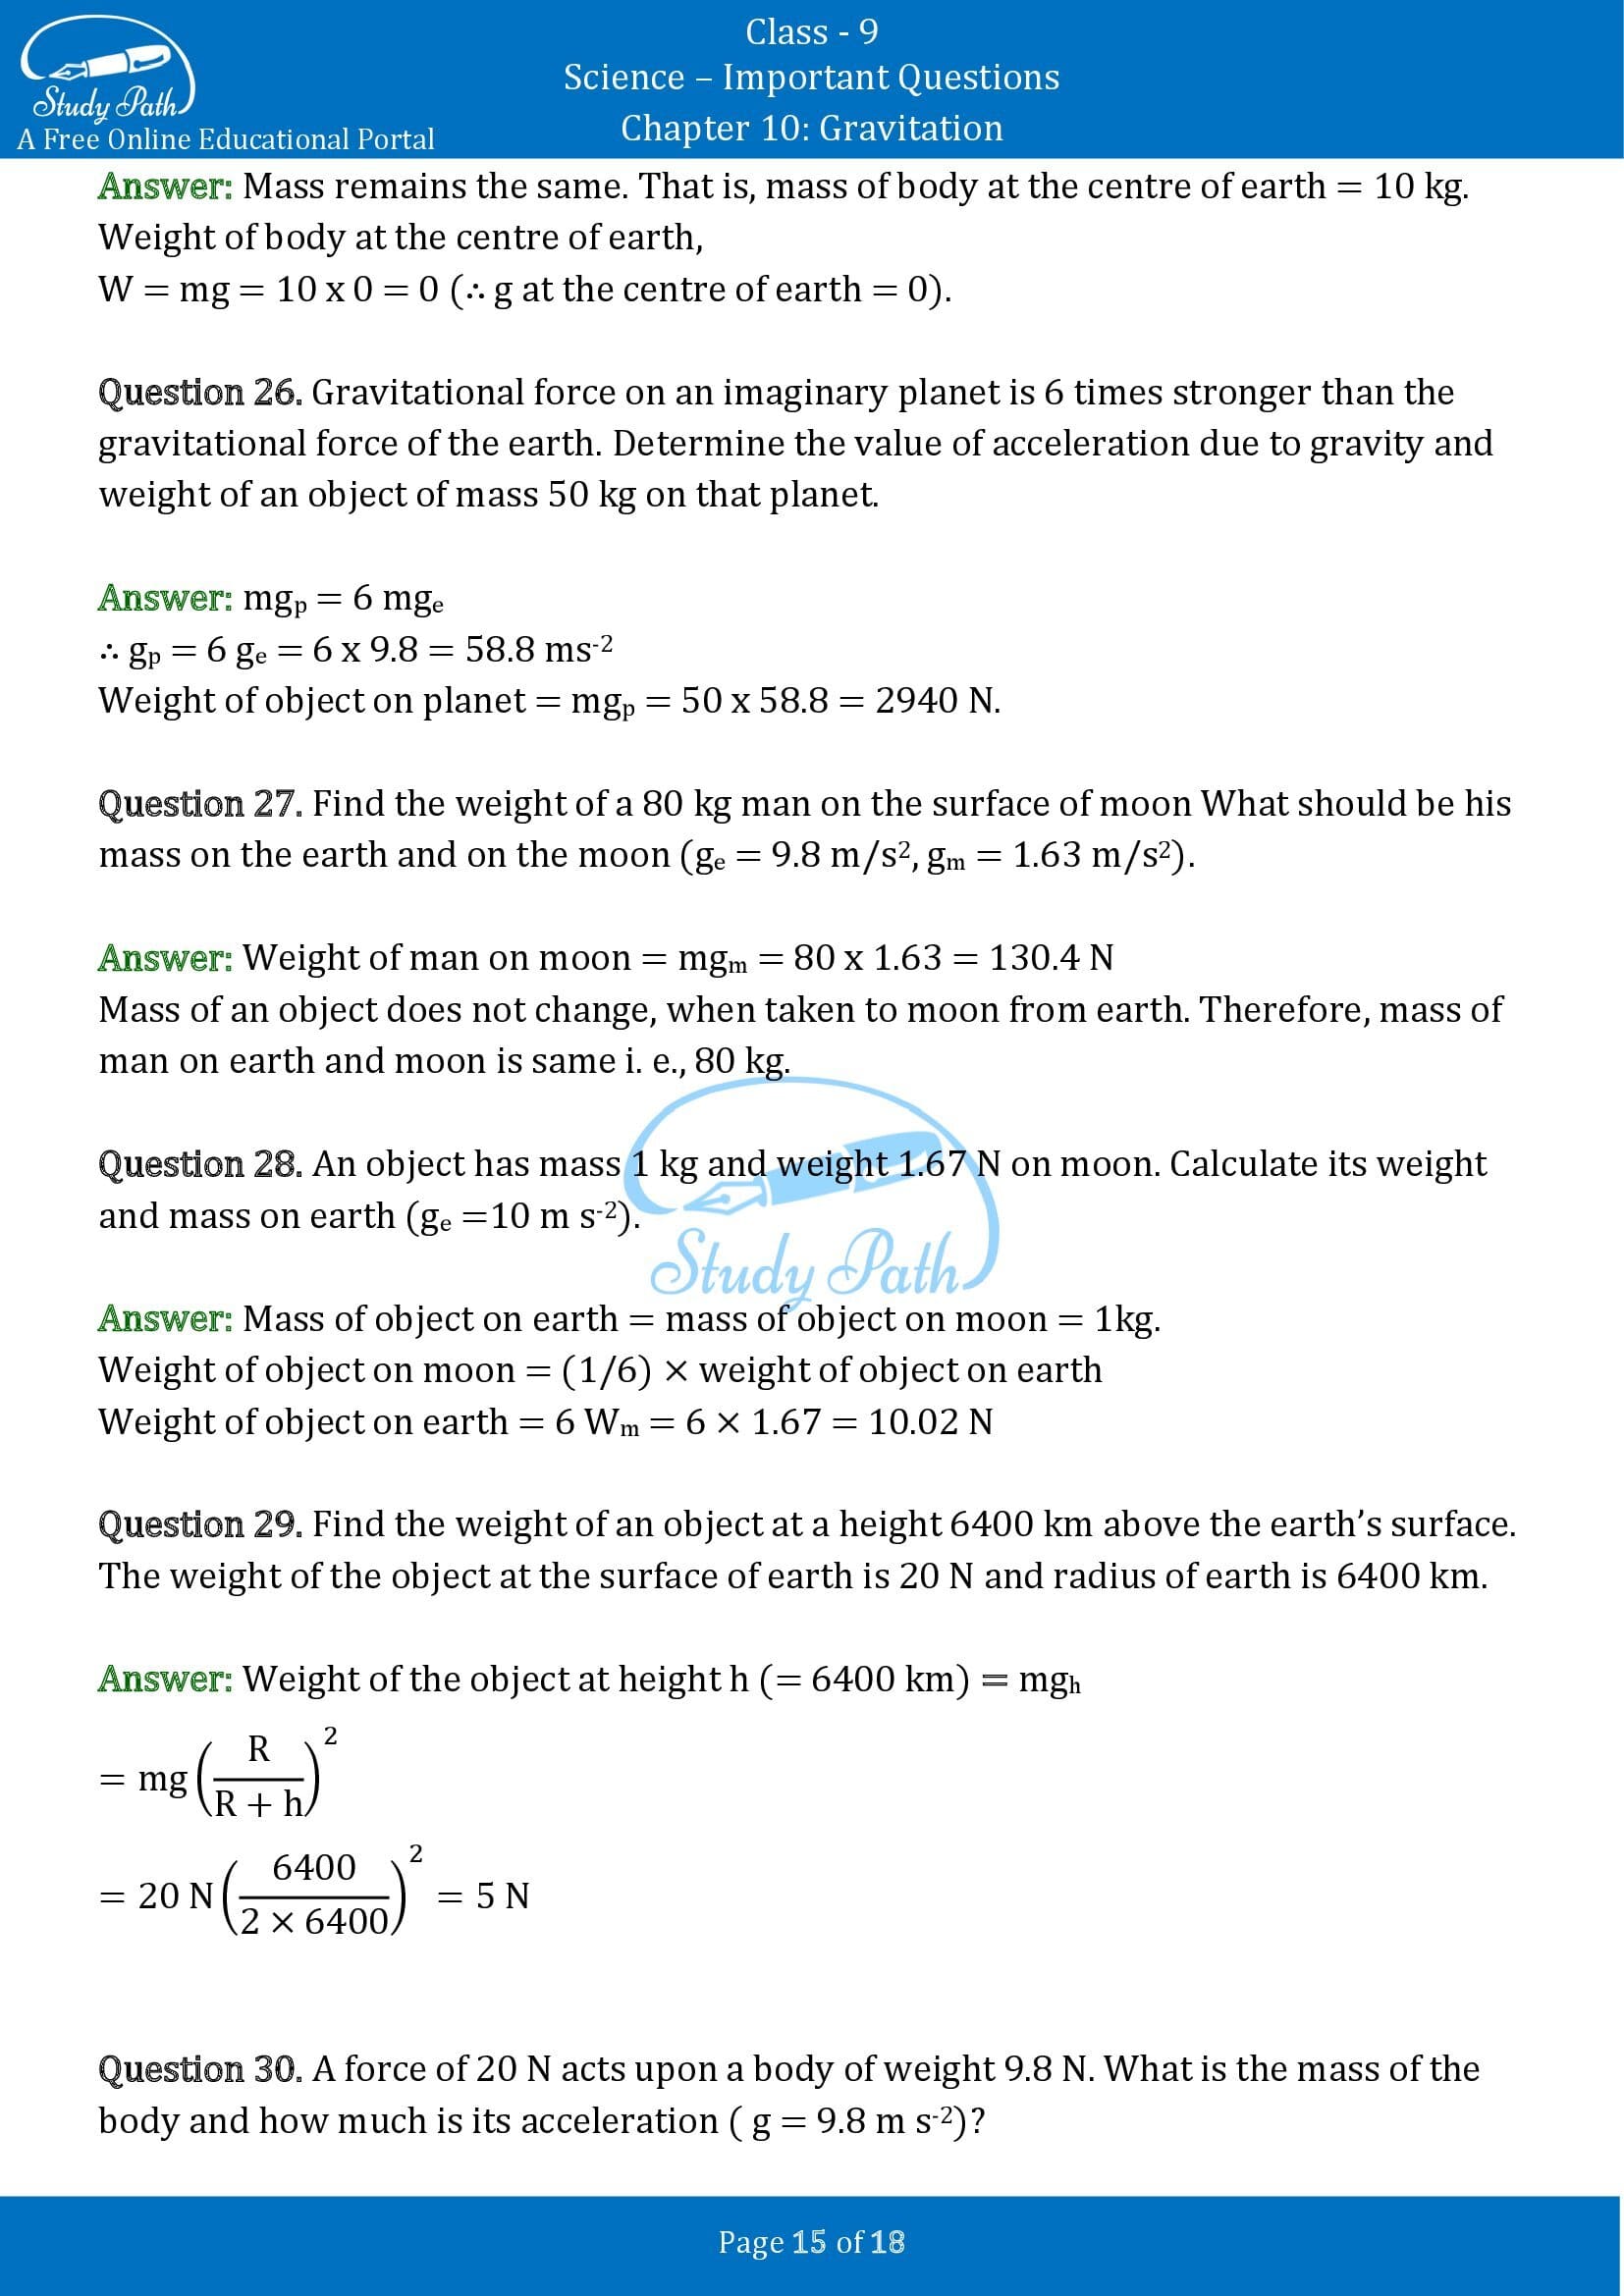 Important Questions for Class 9 Science Chapter 10 Gravitation 00015